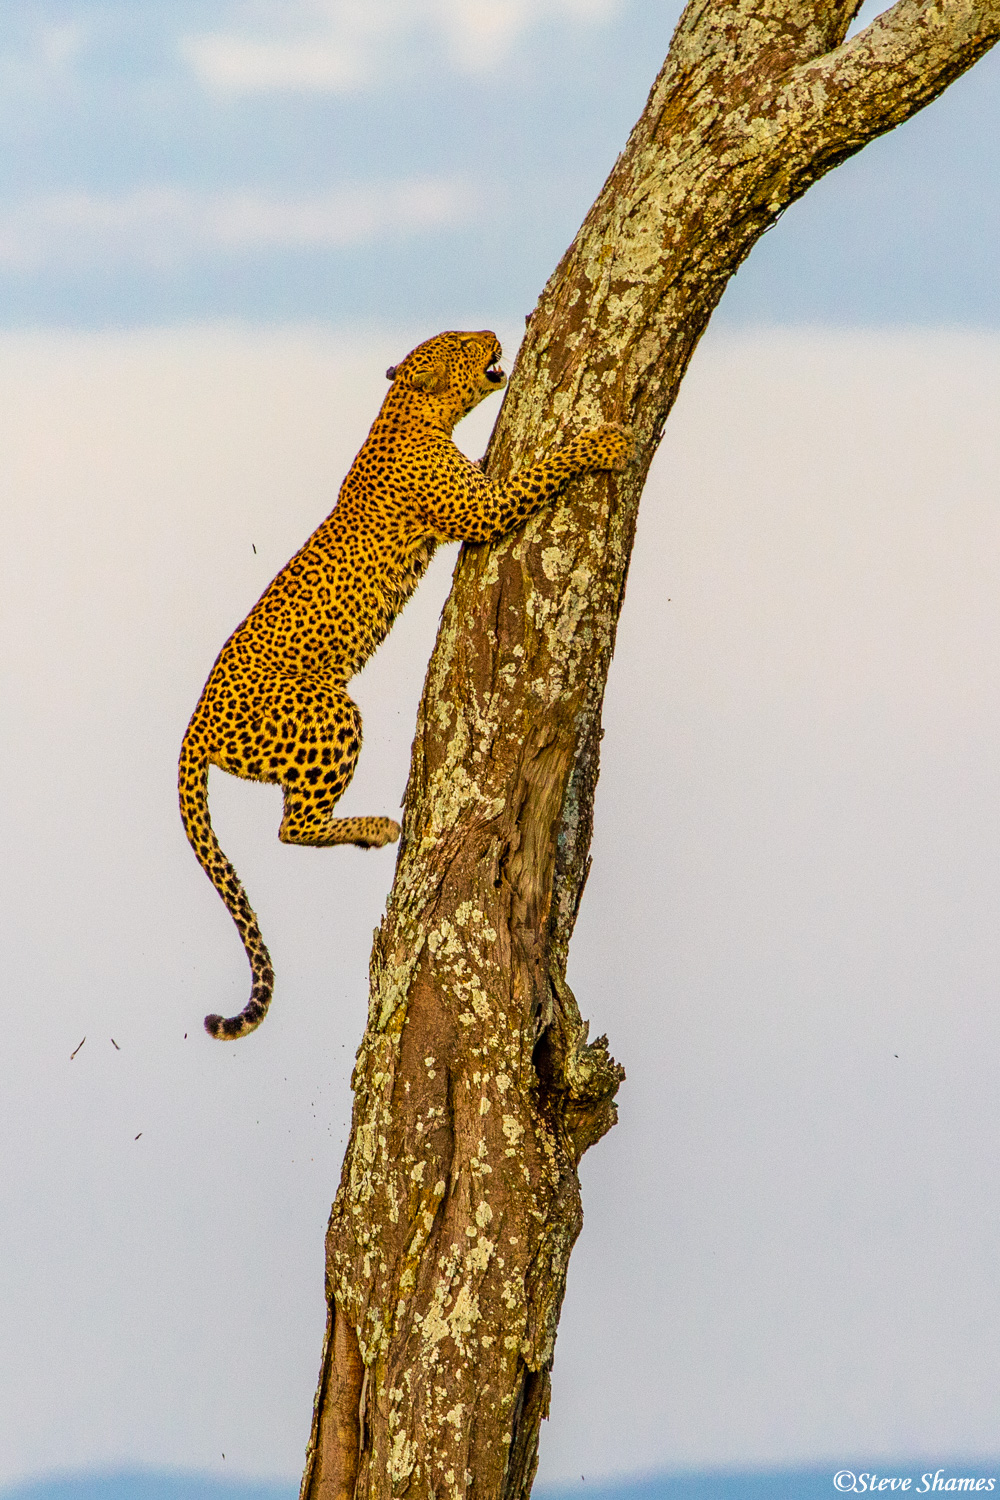 A big male leopard chased this smaller female leopard up the tree. She scurried up there pretty quick!